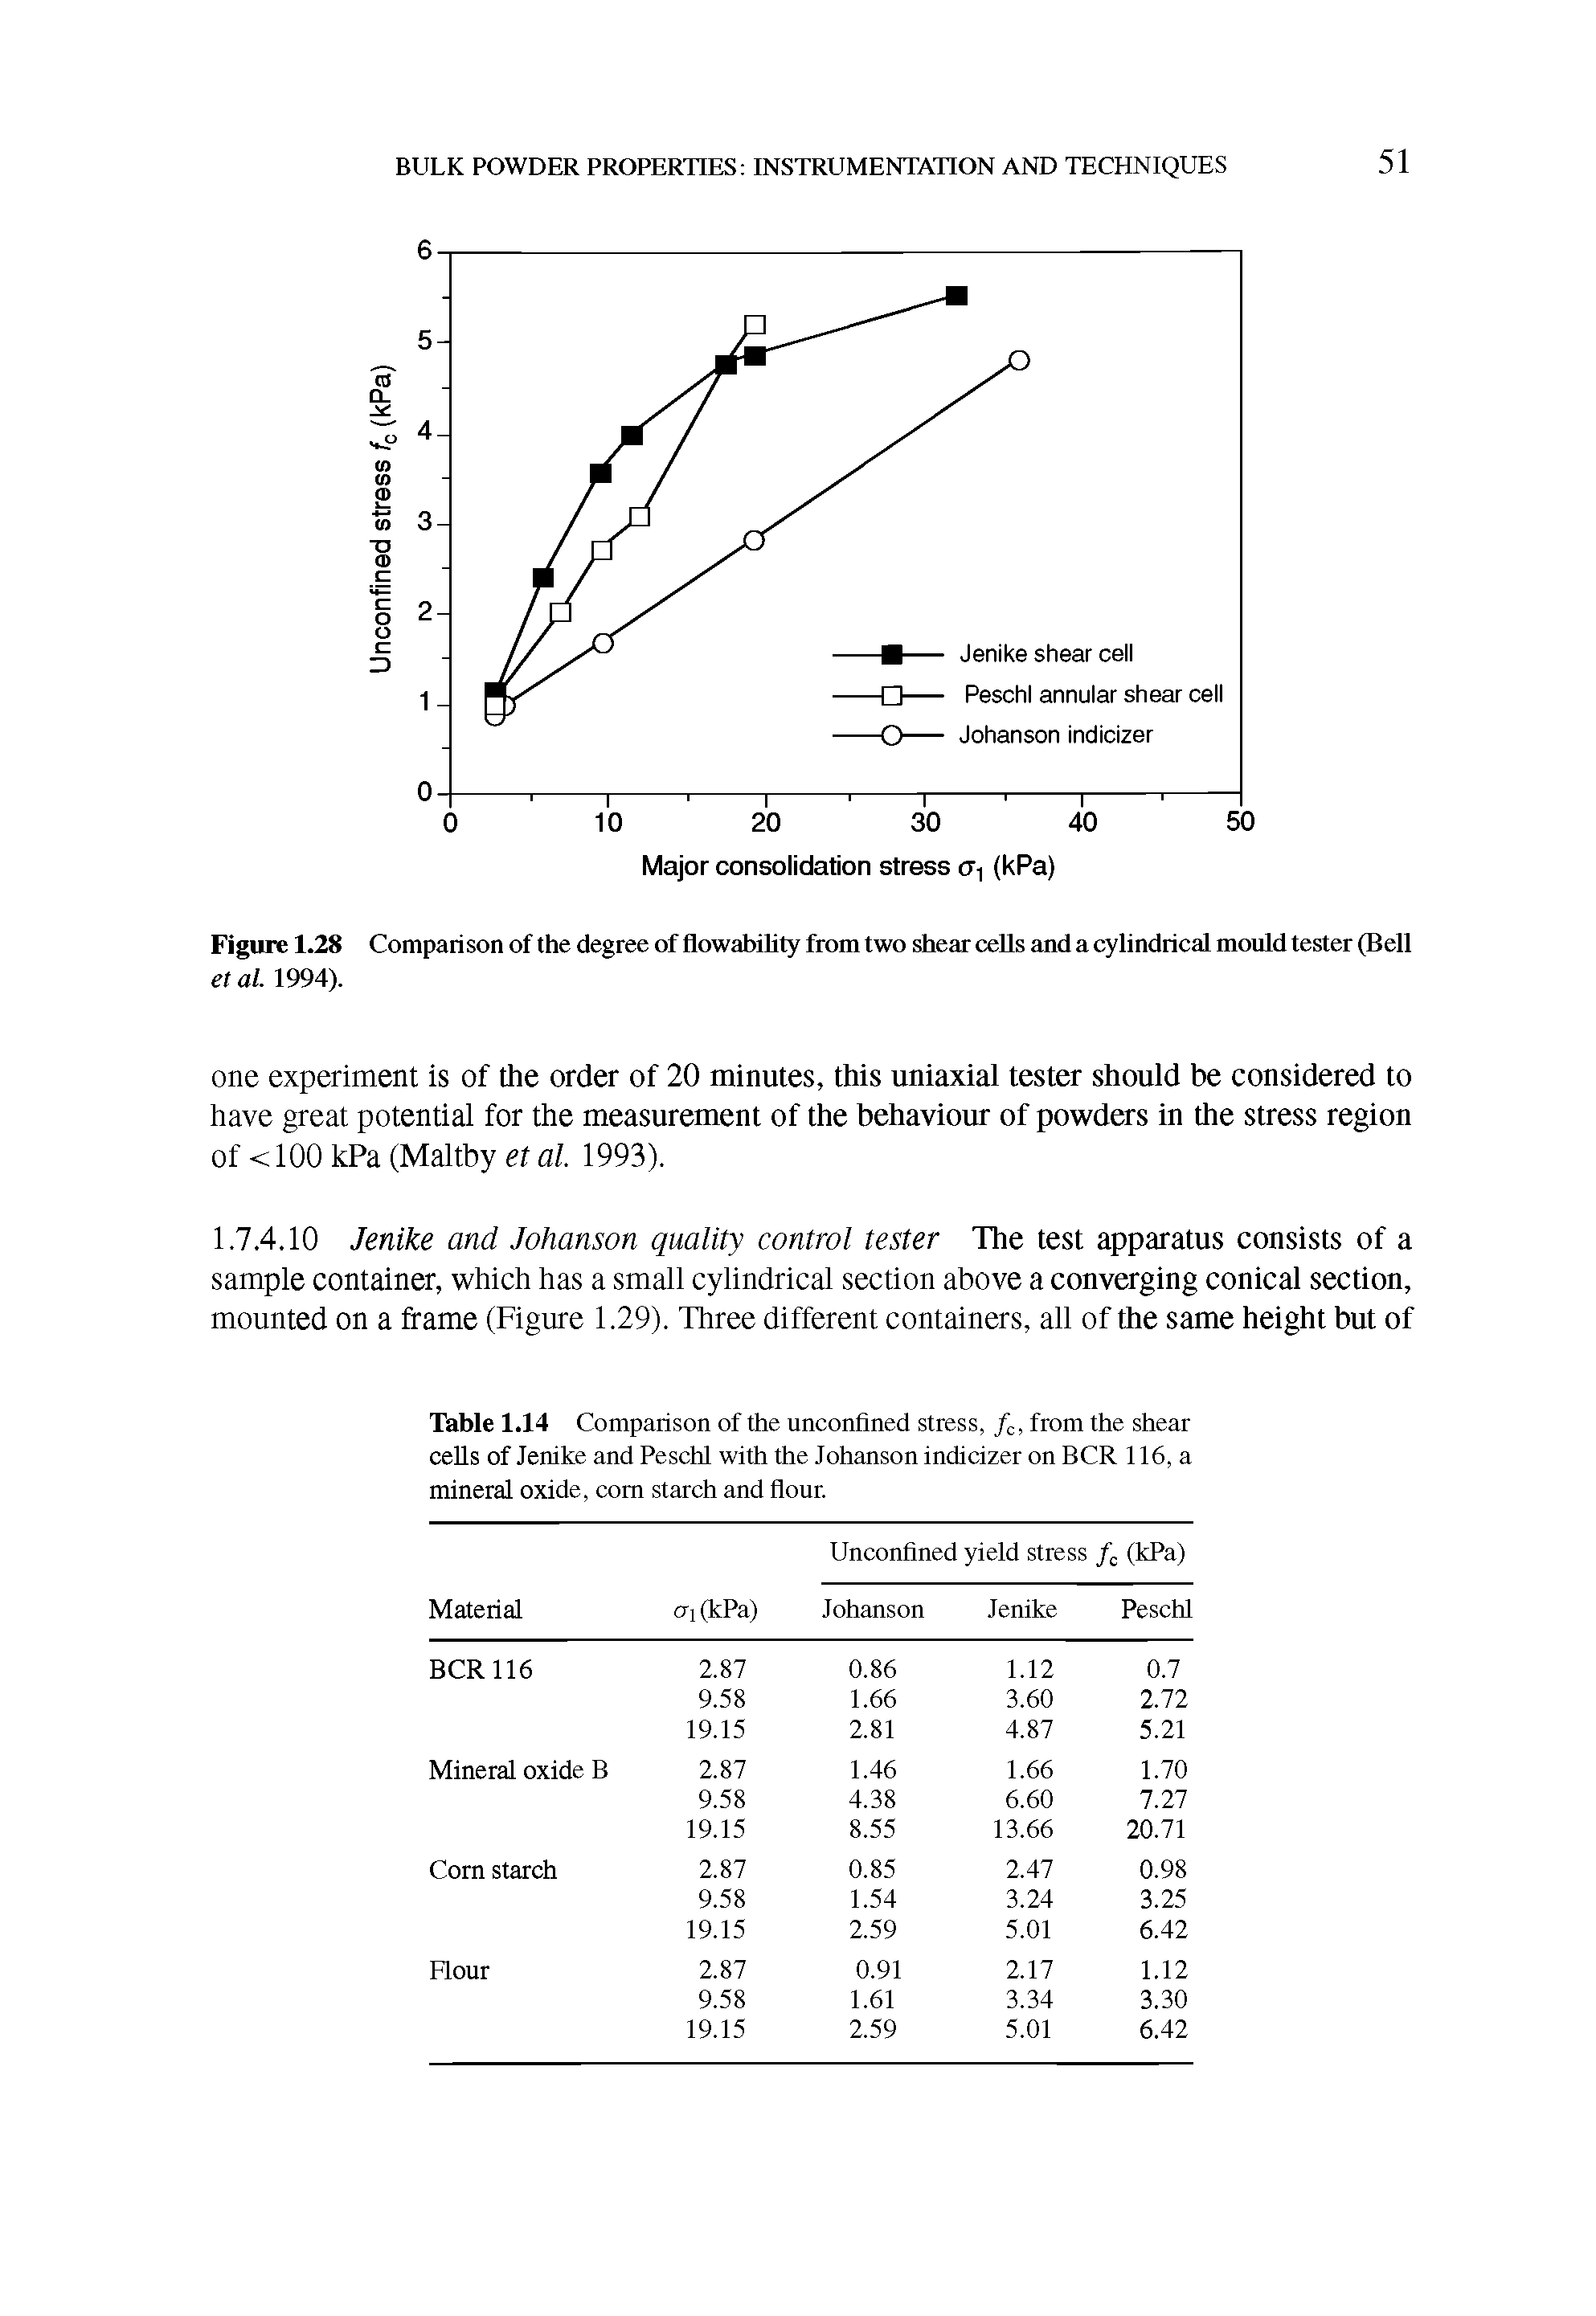 Figure 1.28 Comparison of the degree of flowability from two shear cells and a cylindrical mould tester (Bell etal. 1994).